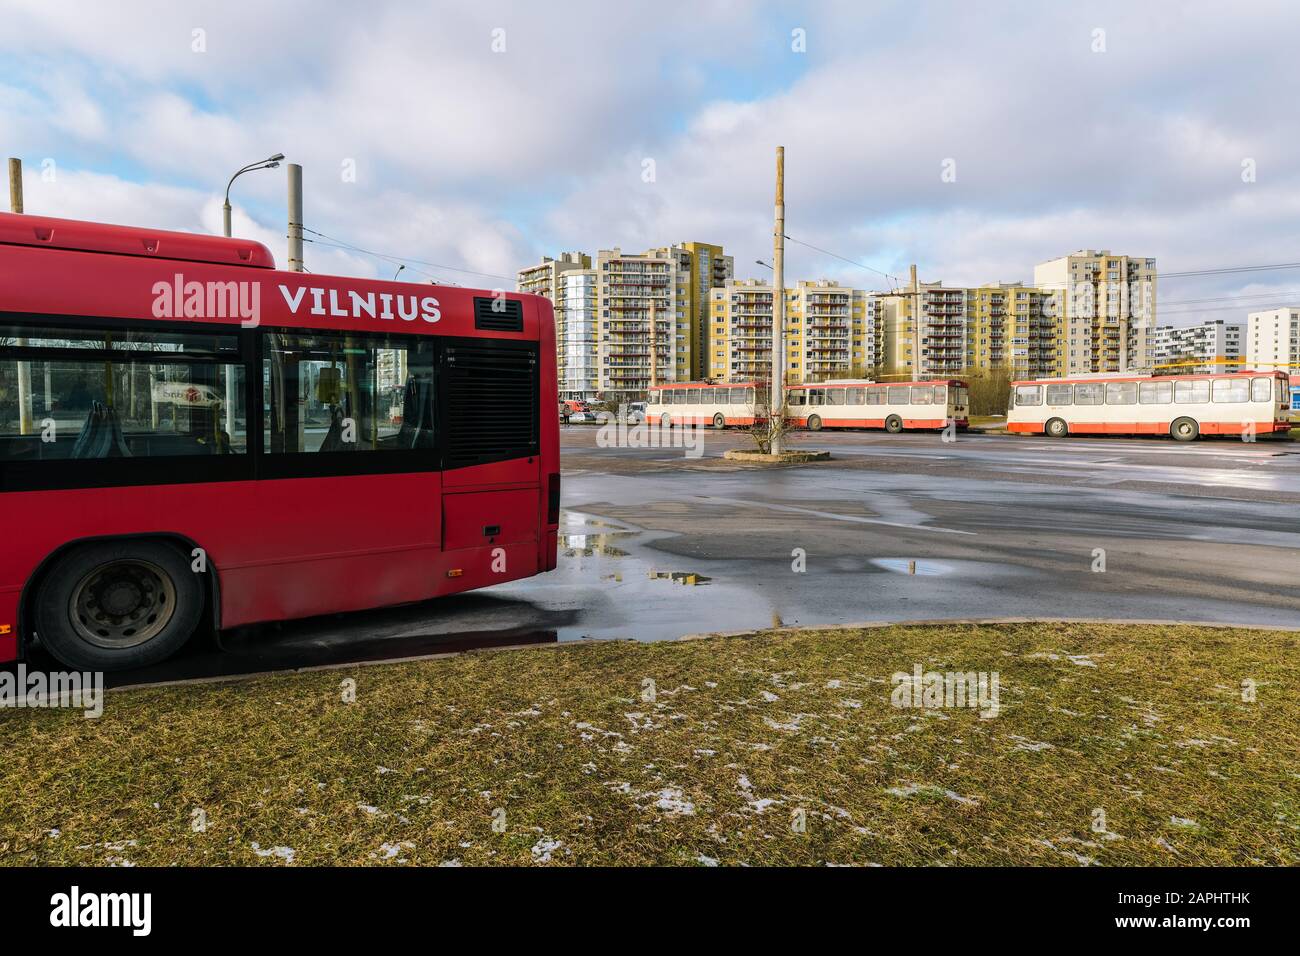 Red bus 'Vilnius' and trolleybuses in the distance Stock Photo